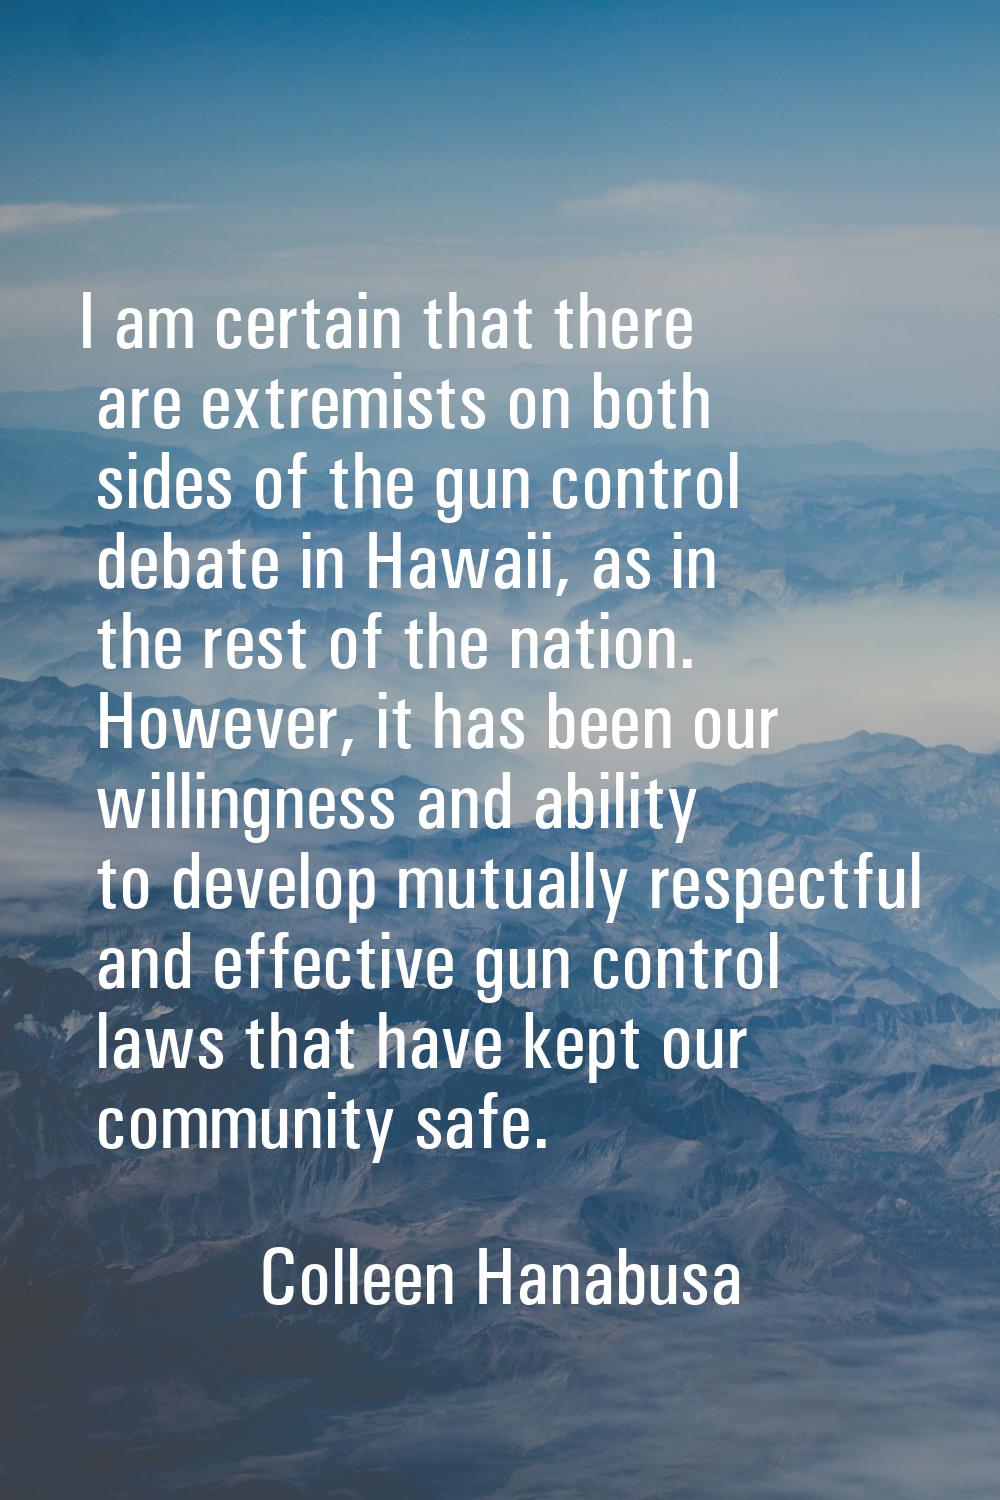 I am certain that there are extremists on both sides of the gun control debate in Hawaii, as in the